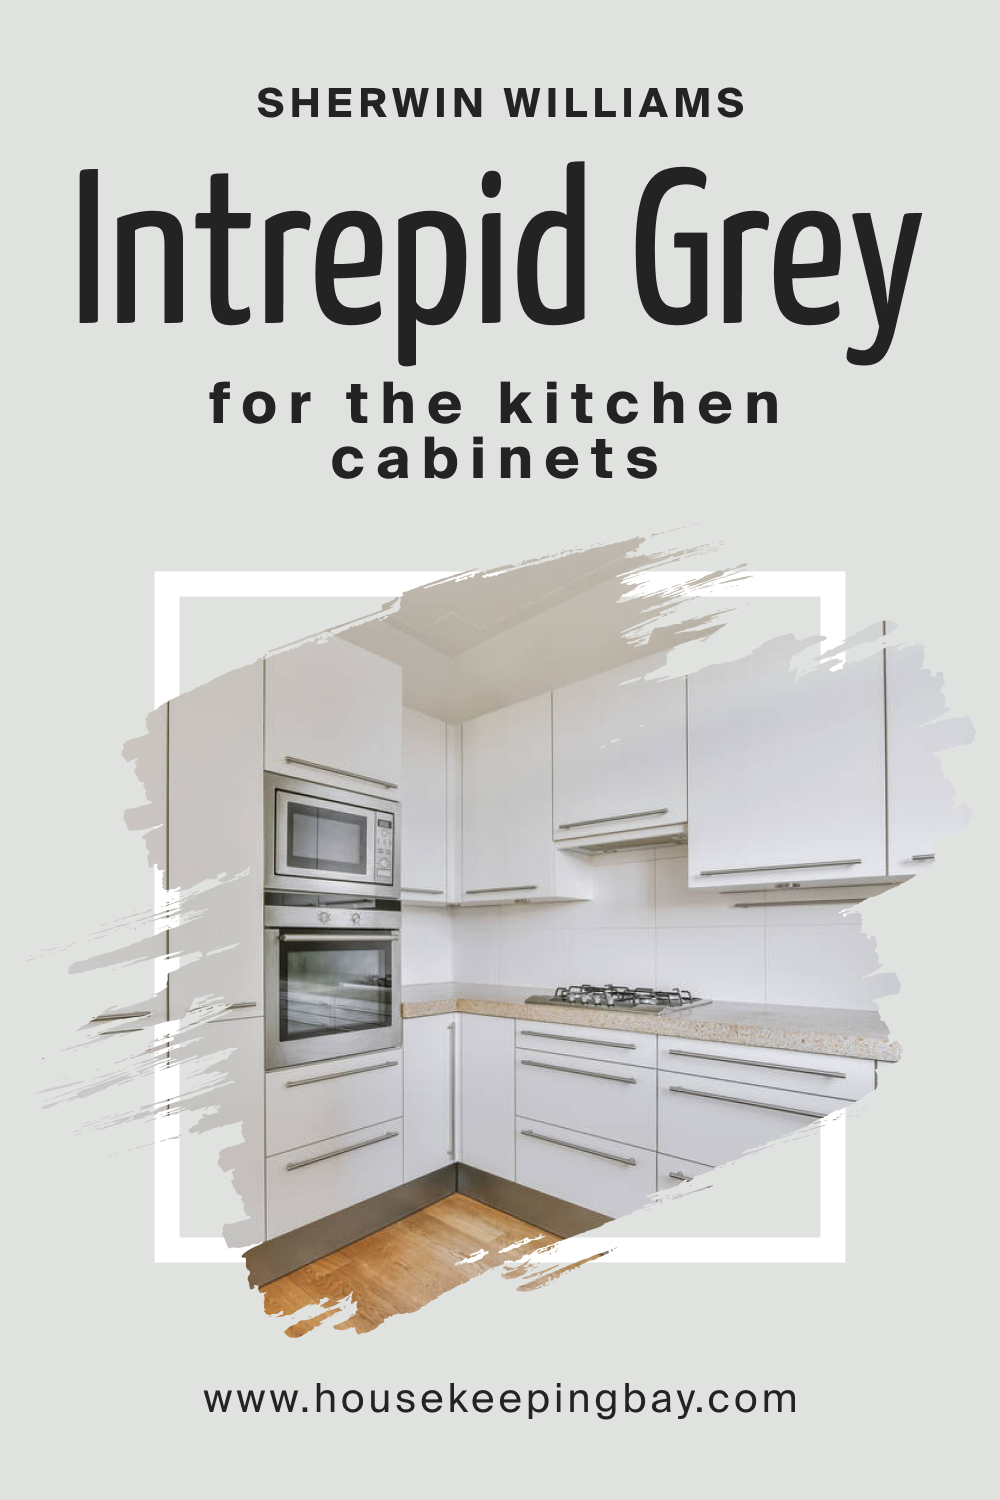 Sherwin Williams. SW 9556 Intrepid Grey For the Kitchen Cabinets